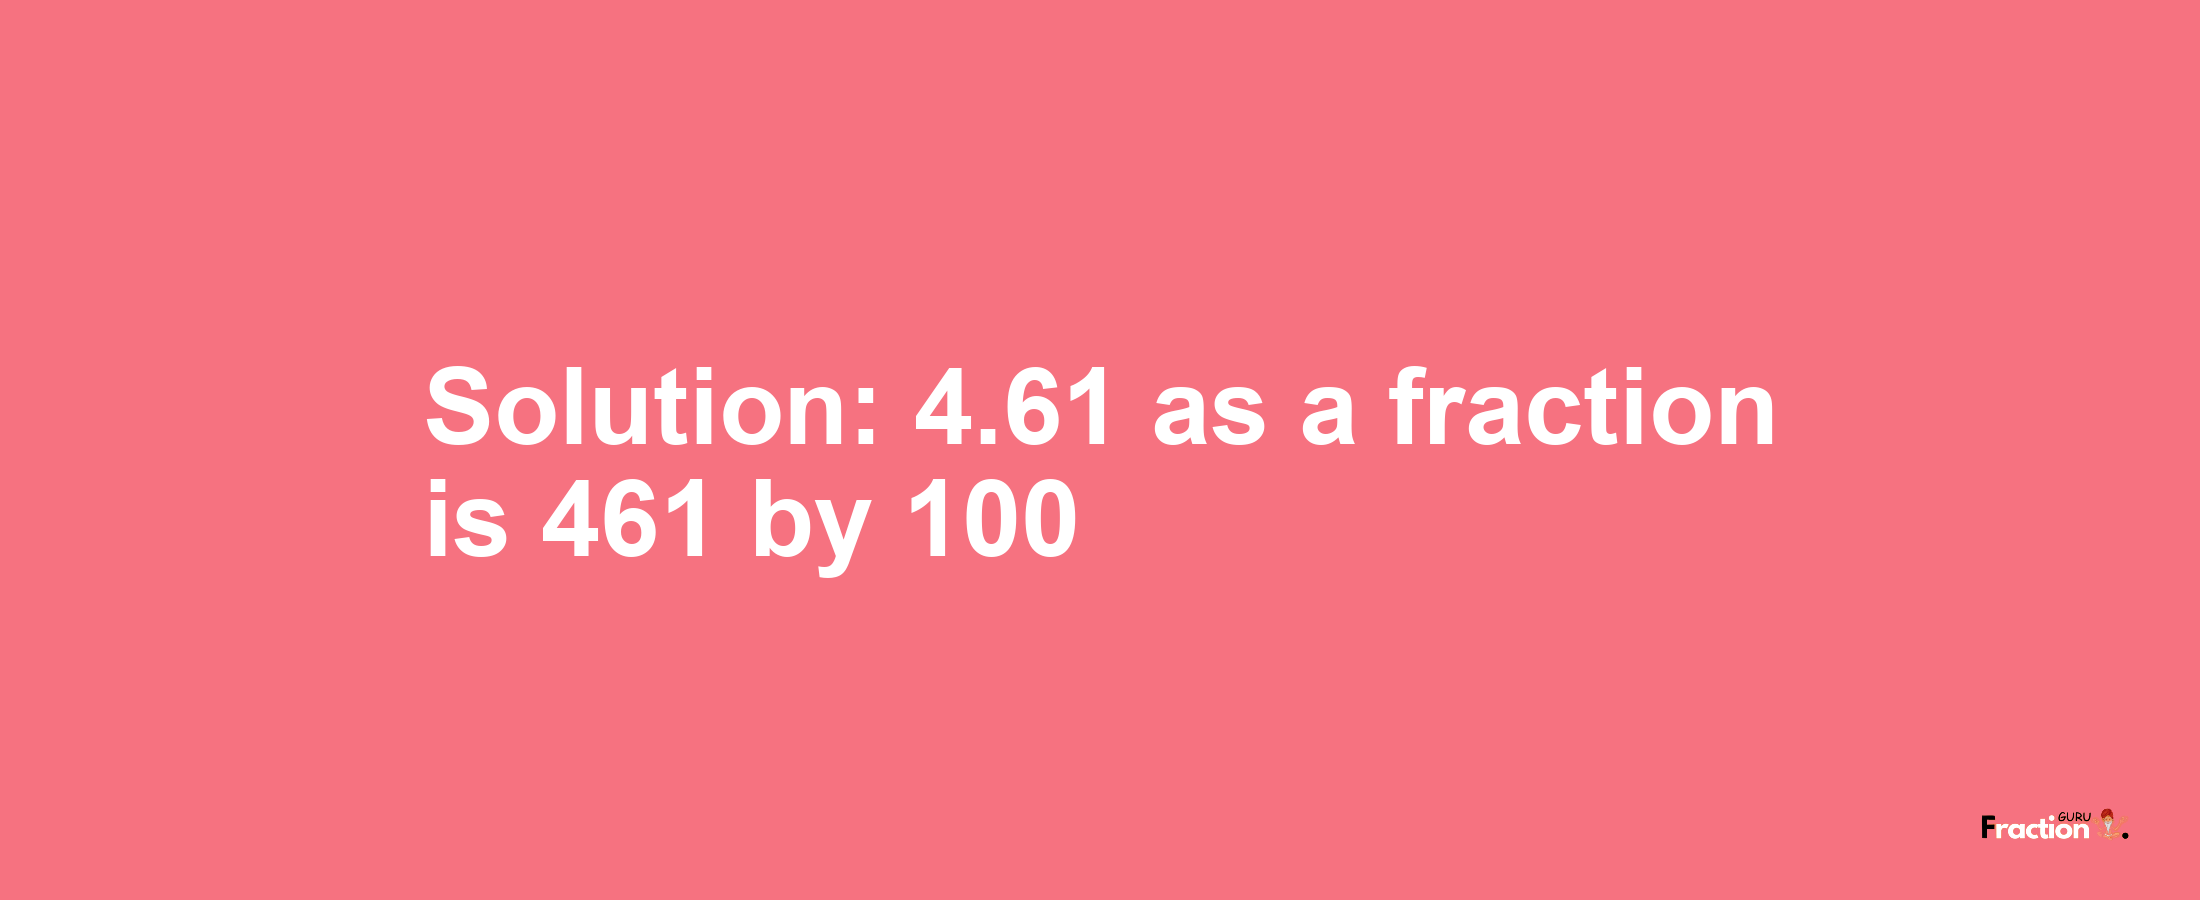 Solution:4.61 as a fraction is 461/100